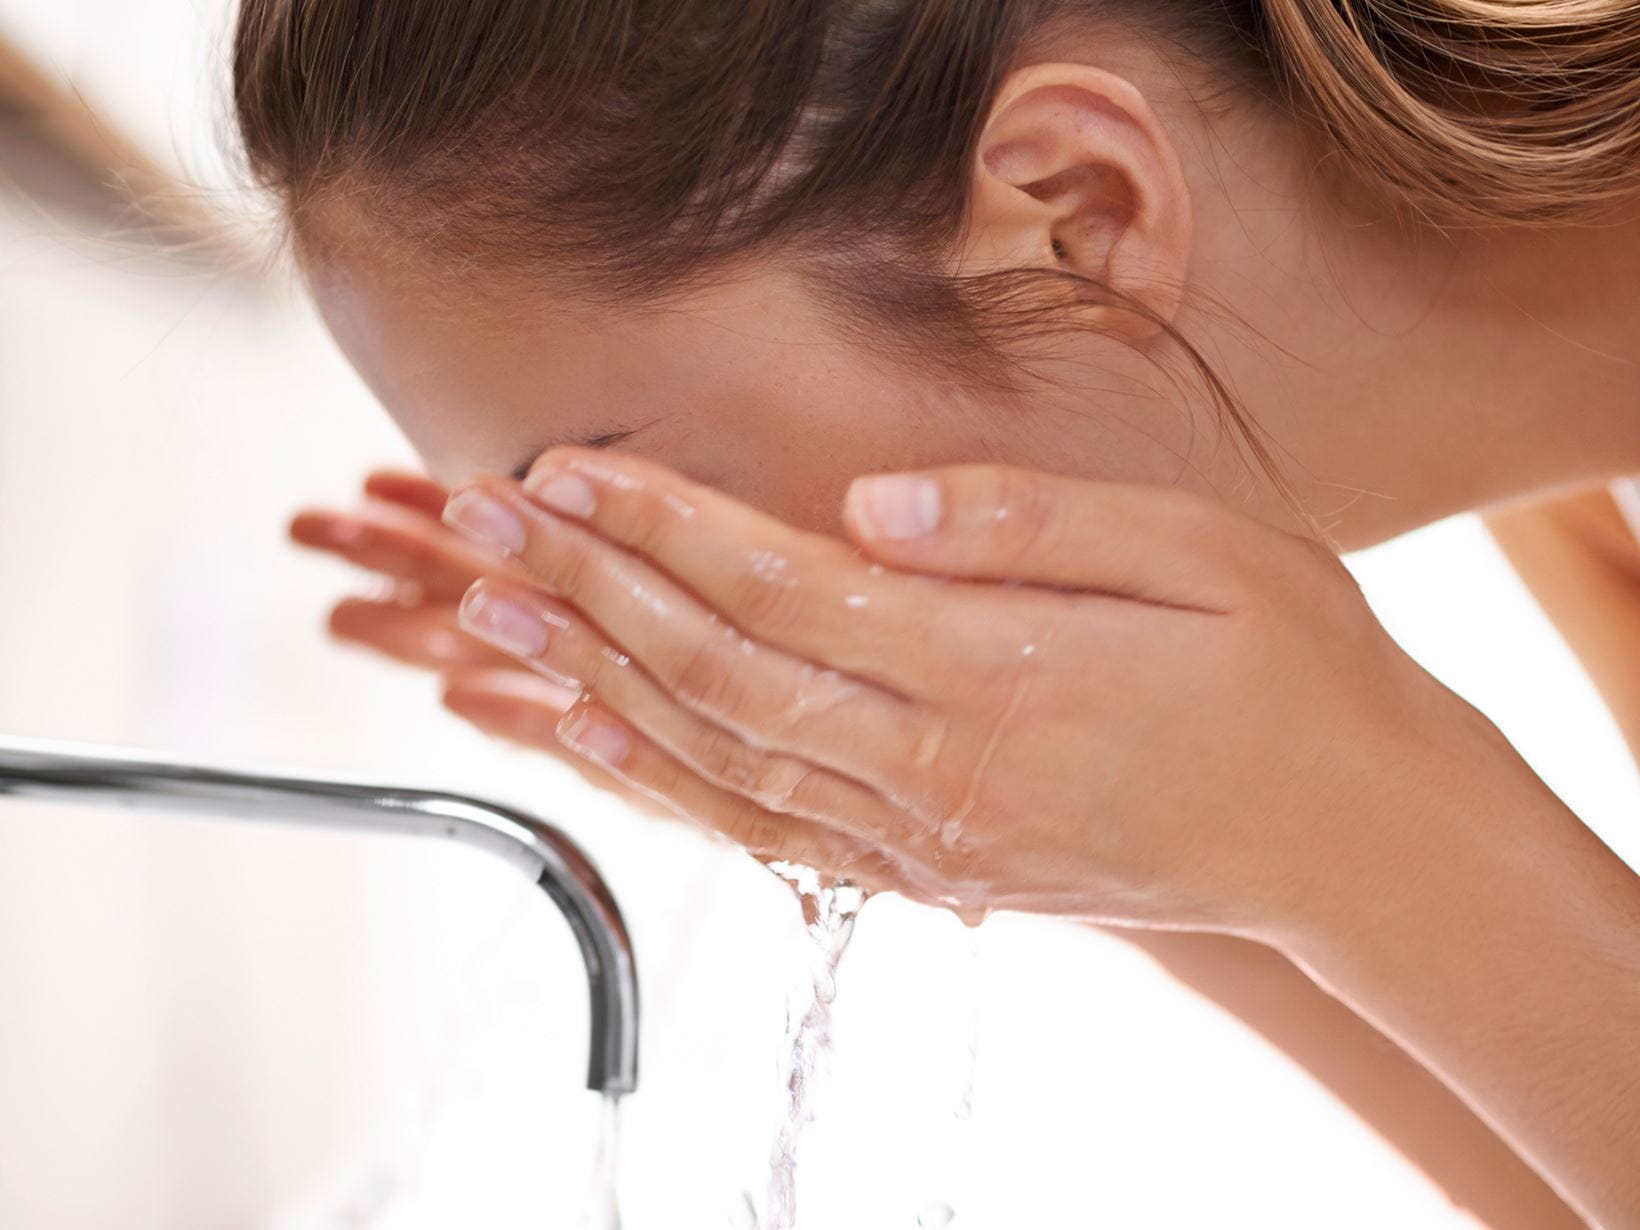 lady washing her face at the sink